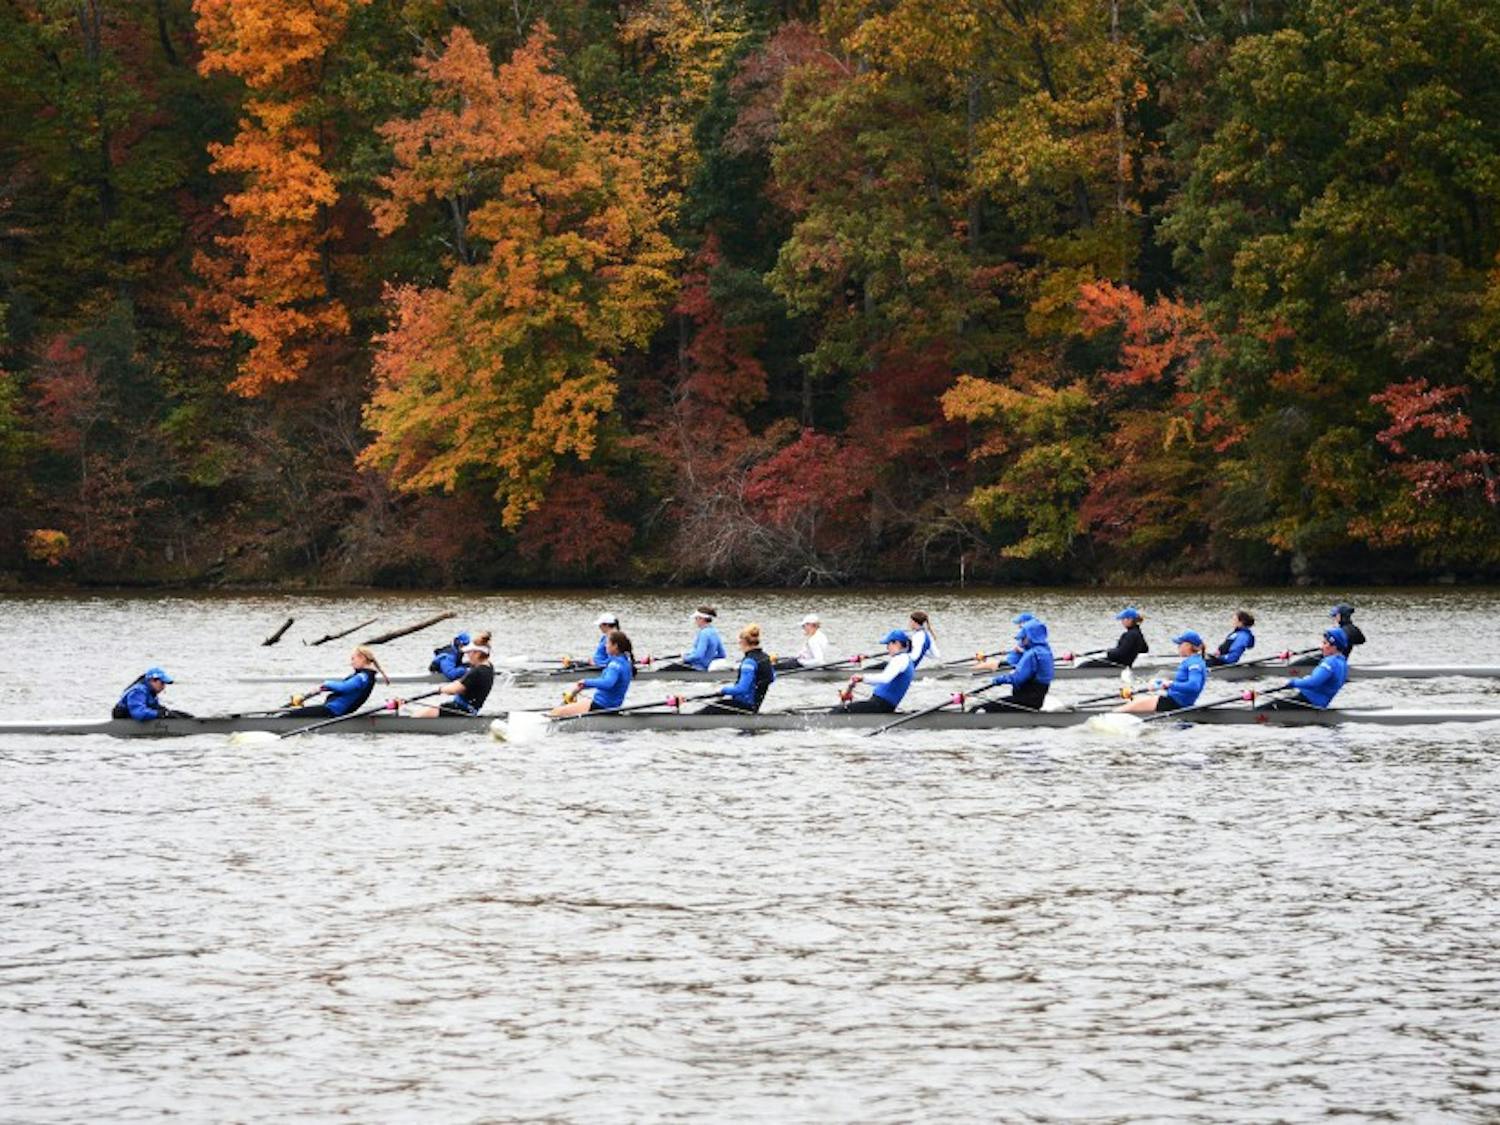 Duke's varsity eight boats will aim to bounce back from losses to Stanford and UCLA last month, but will have to do so against No. 3 Virginia Saturday.